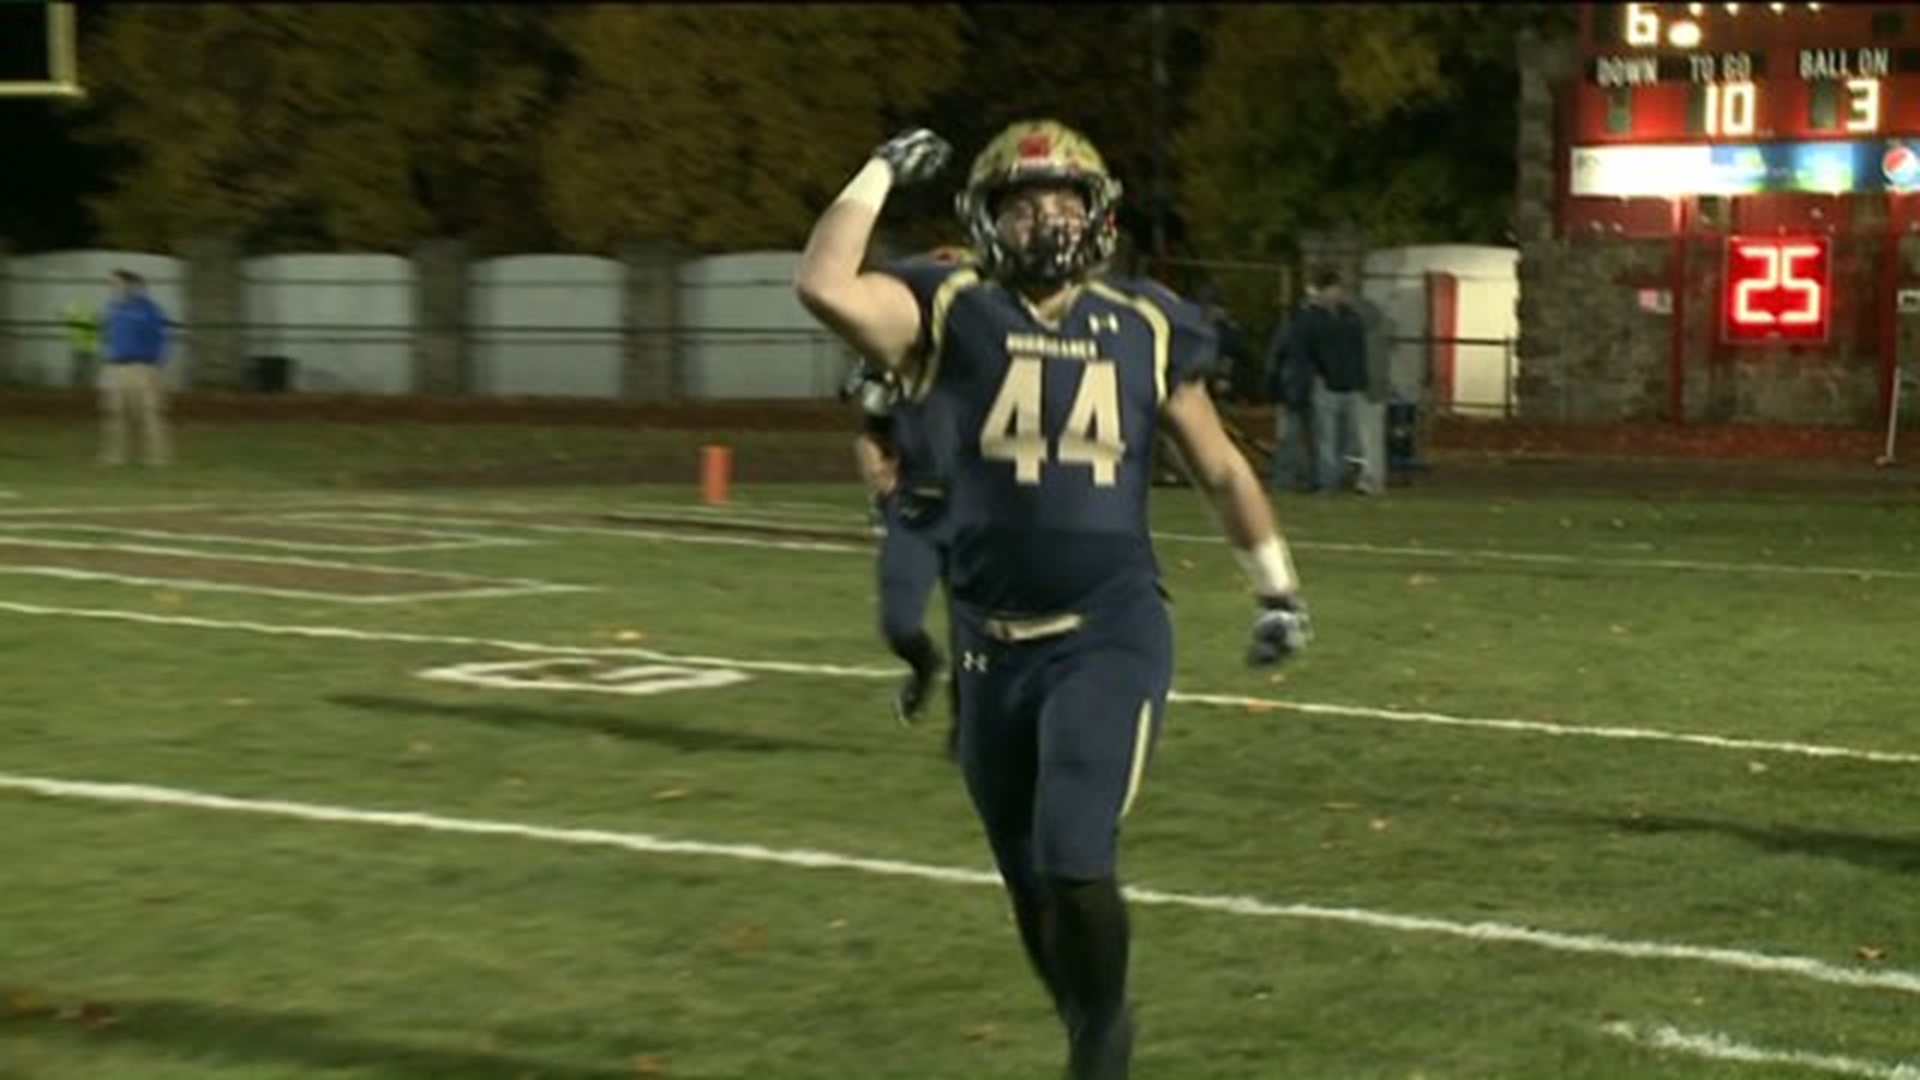 Schuylkill Haven Rolls to District XI "AA" Title